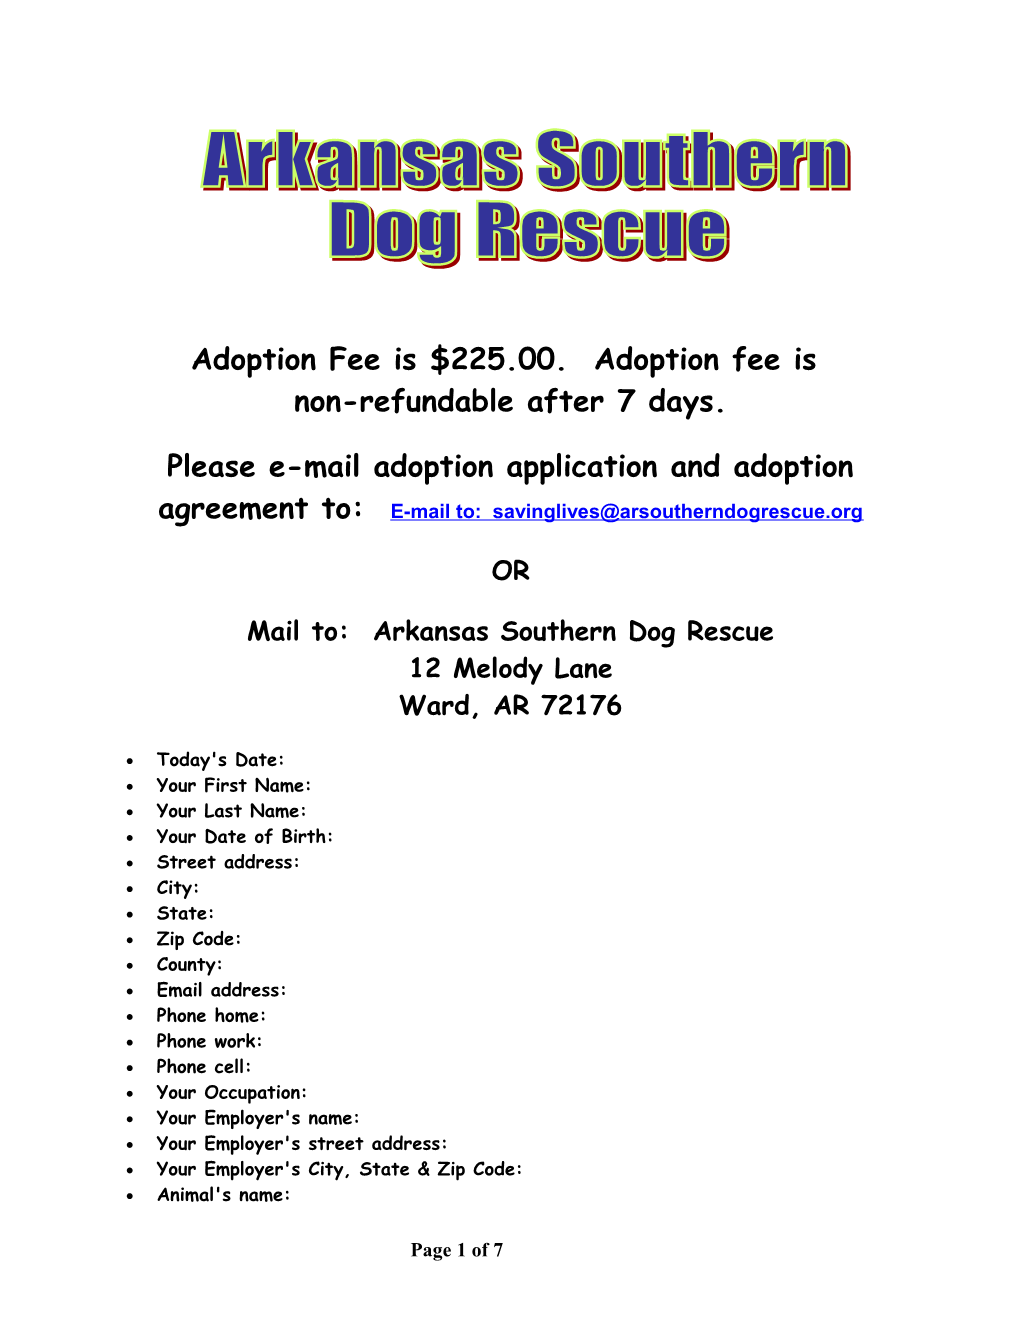 Adoption Fee Is $225.00. Adoption Fee Is Non-Refundable After 7 Days